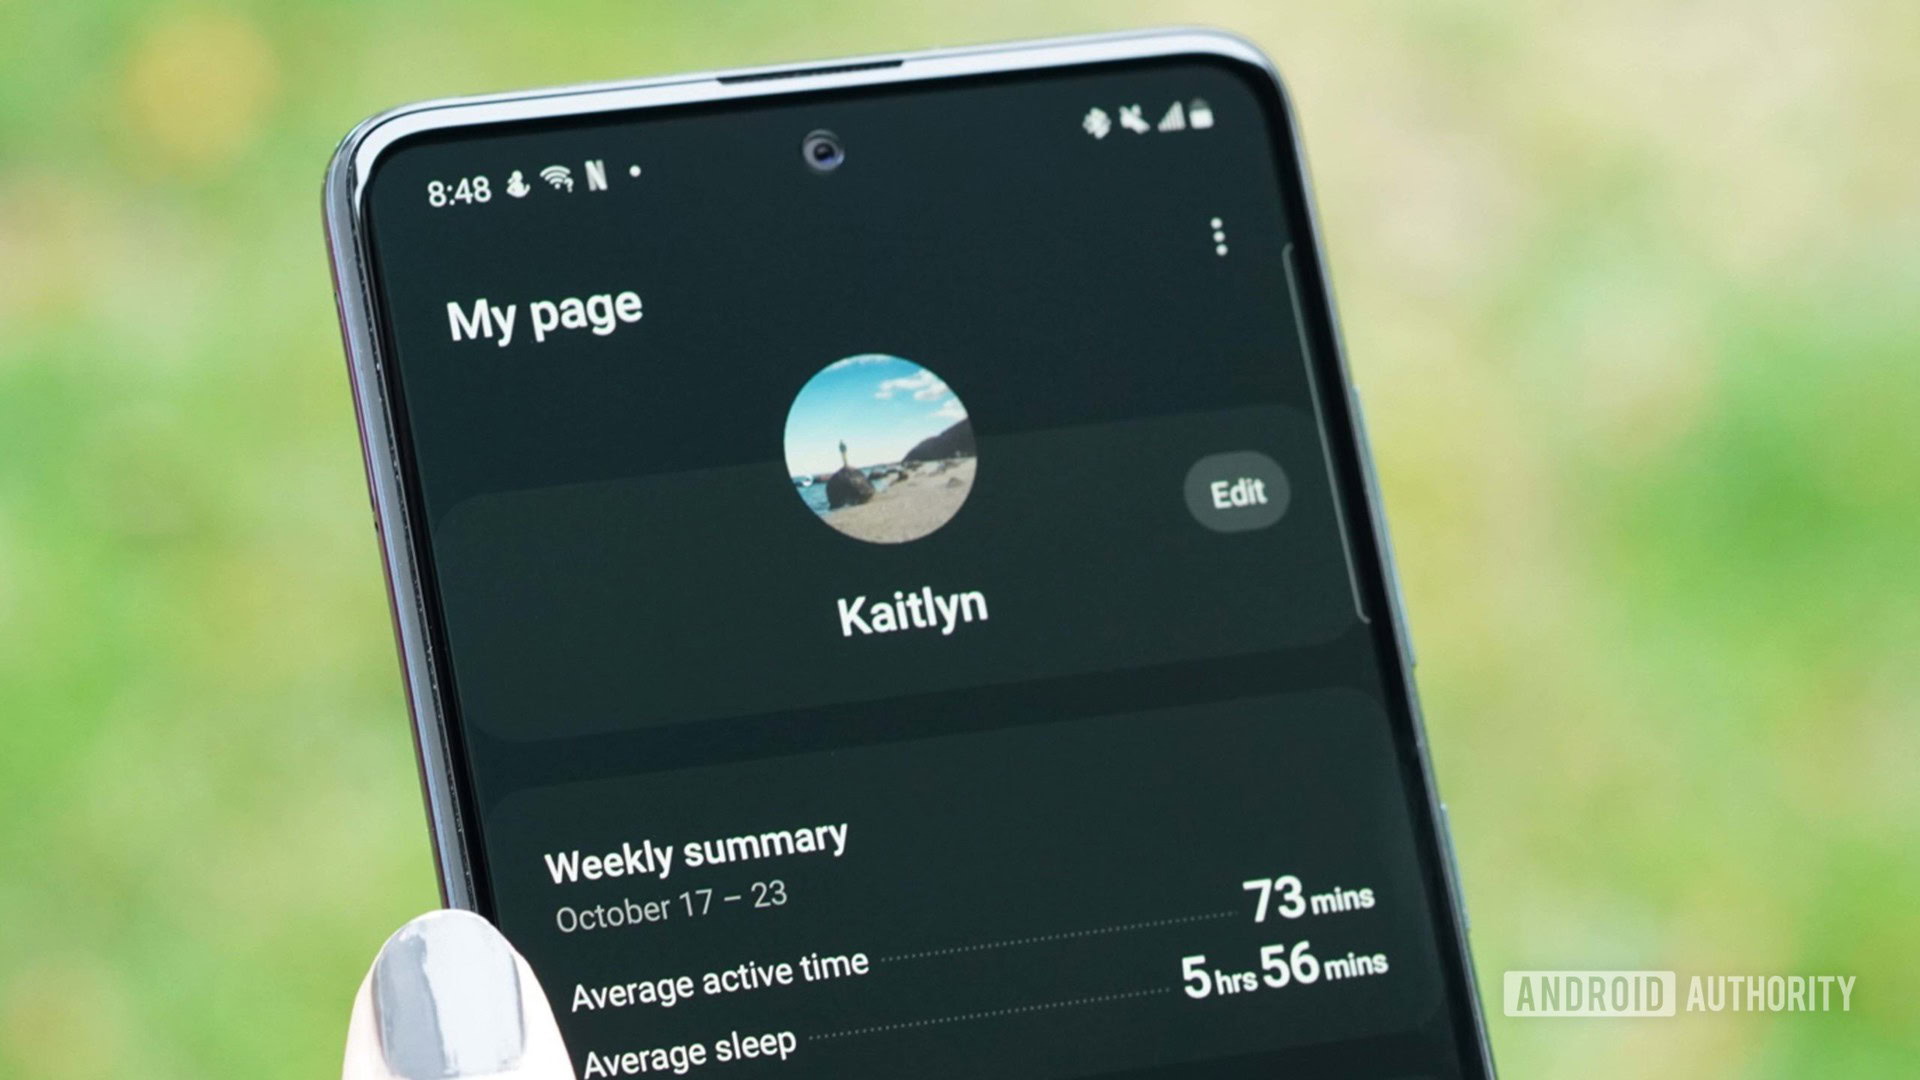 https://www.androidauthority.com/wp-content/uploads/2021/10/Samsung-Health-App-My-Page-1-scaled.jpg